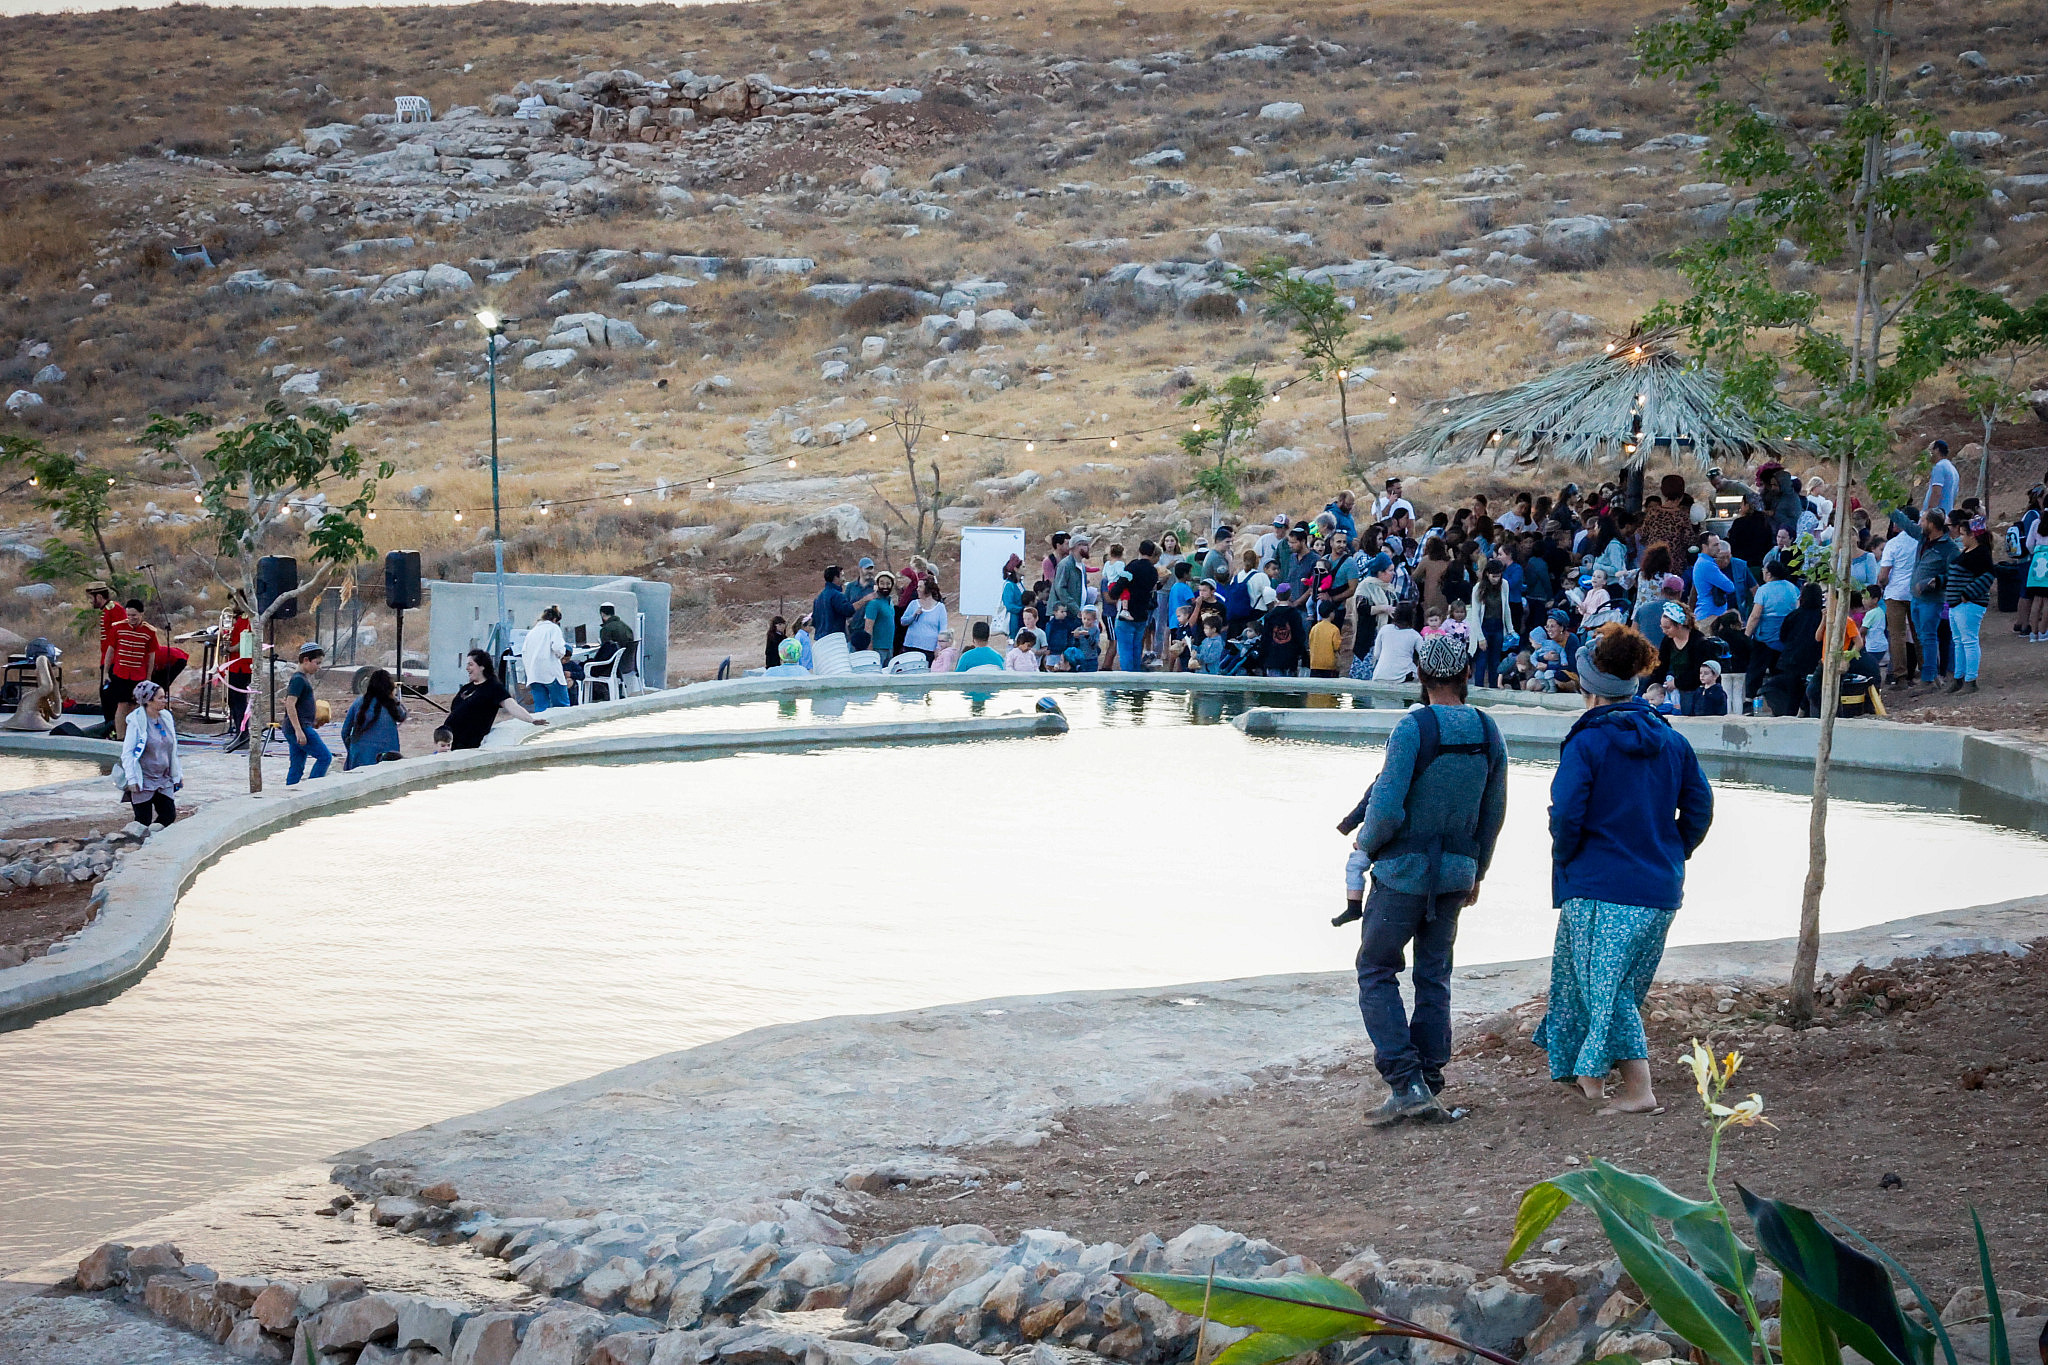 View of a newly built water pool in the Jewish settlement of Nokdim, in the West Bank, October 20, 2021. (Gershon Elinson/Flash90)